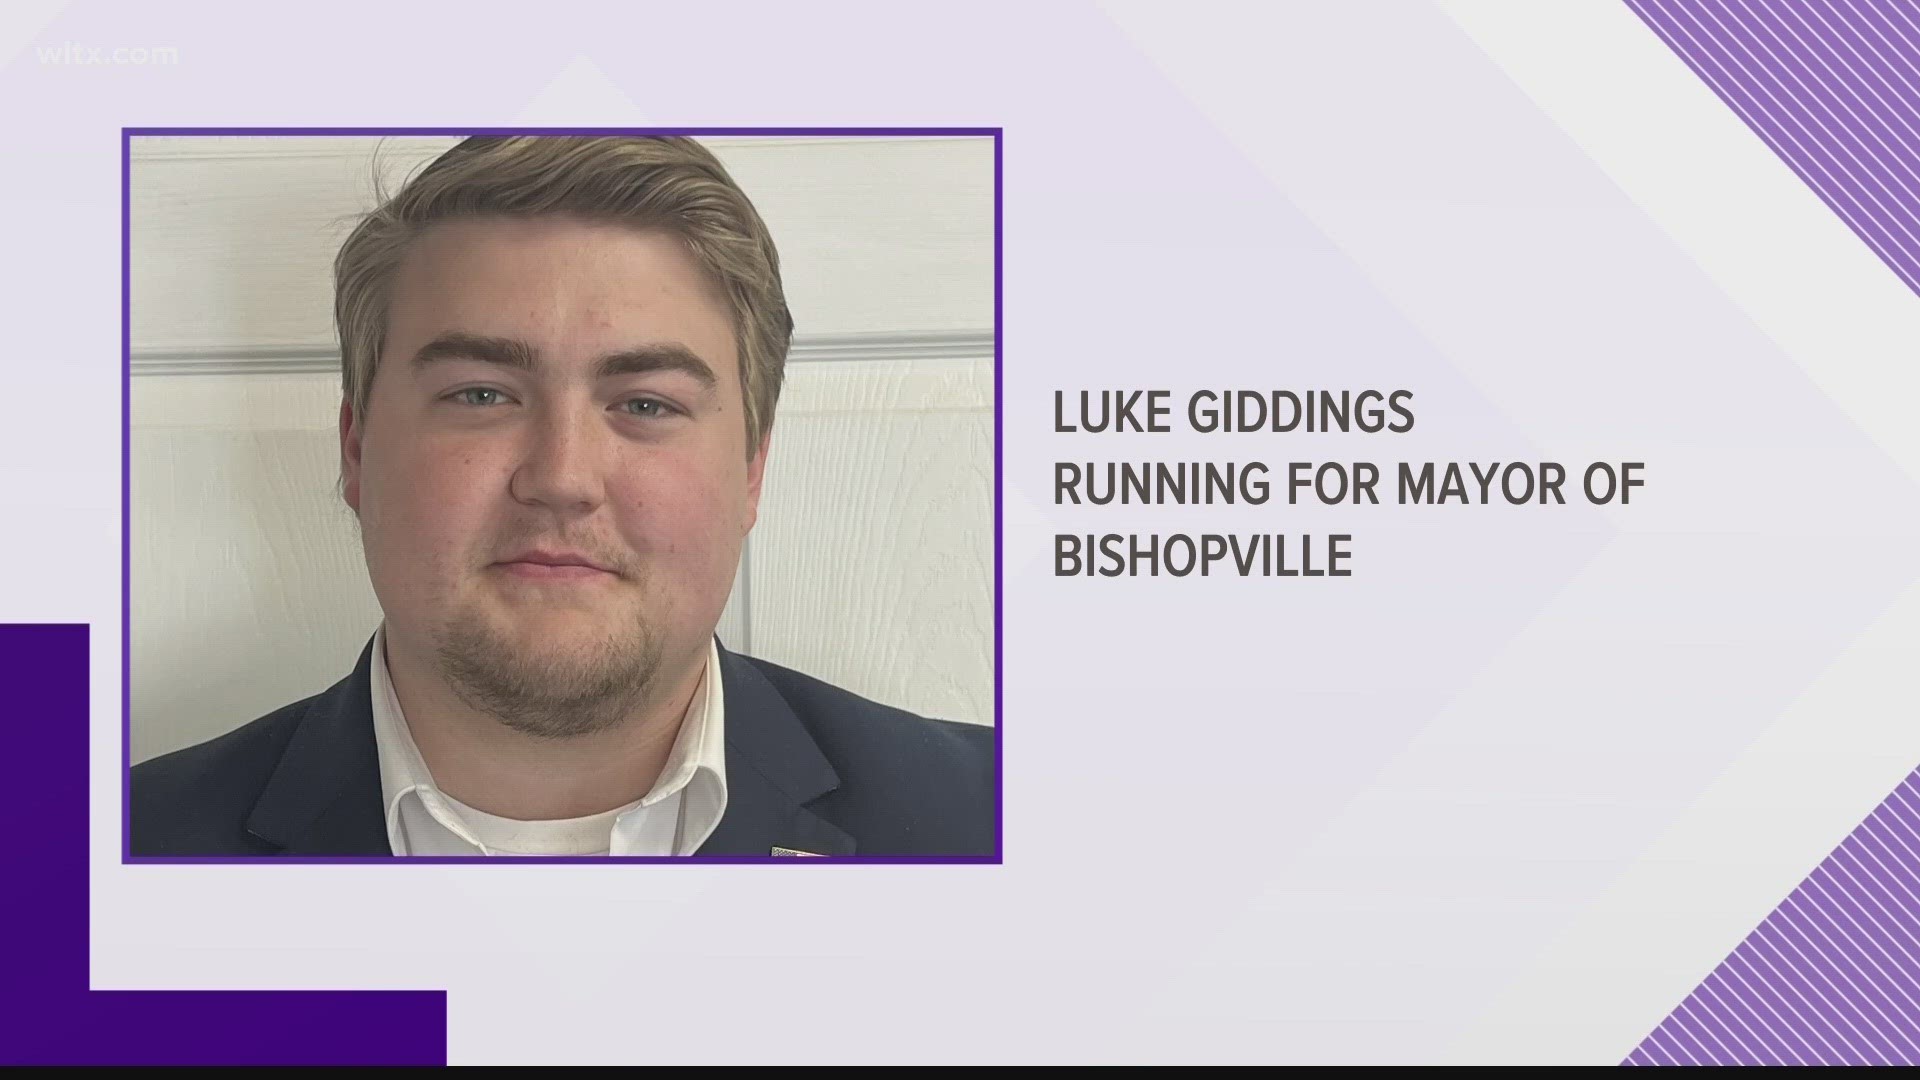 21-year-old Luke Giddings has defeated 79-year-old incumbent mayor Grady Brown, Sr. to become Bishopville's new mayor.